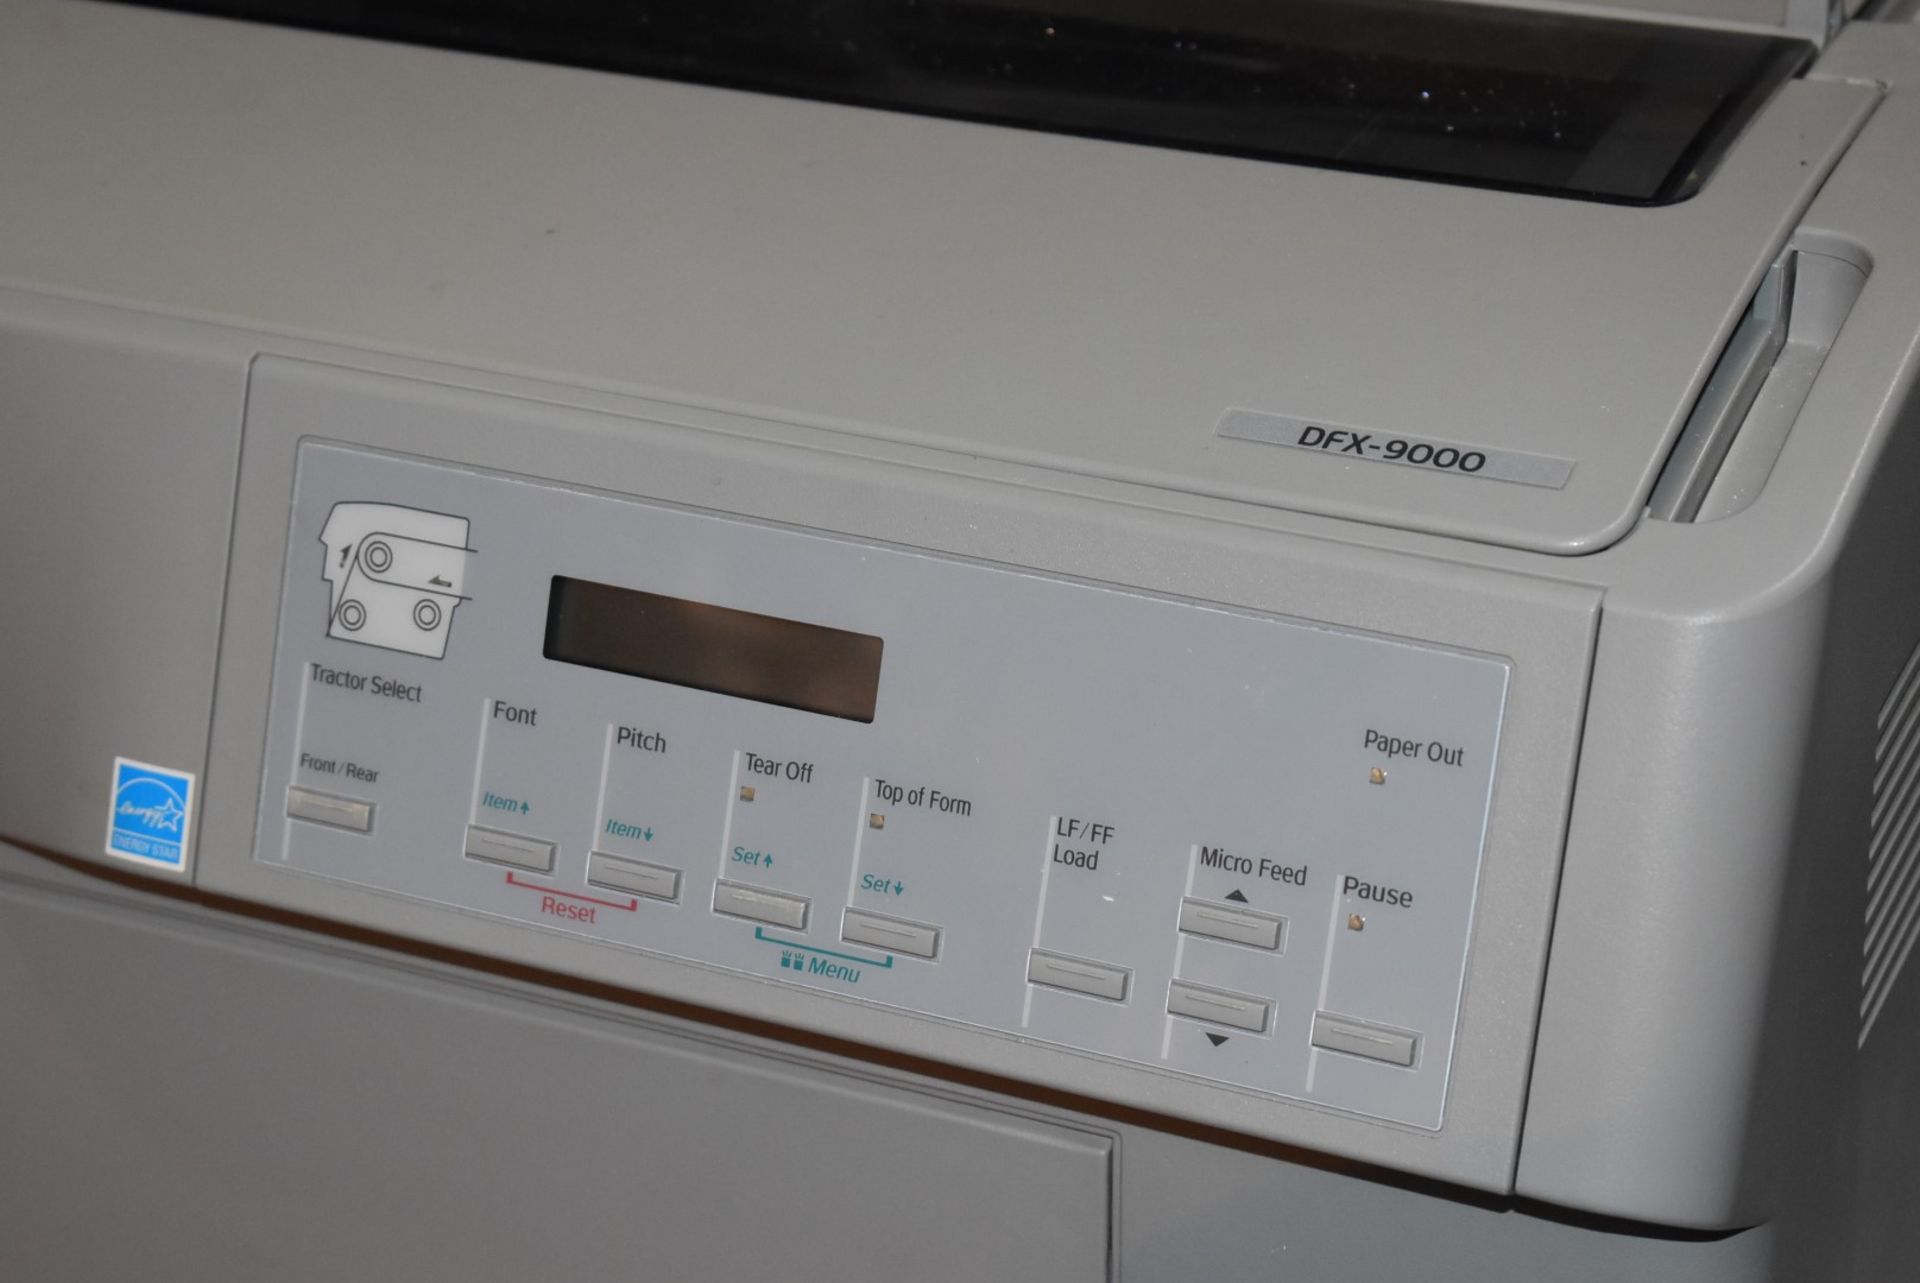 1 x Epson DFX-9000 A3 Mono Dot Matrix Printer - RRP £4,400 - Recently Removed From an Office - Image 3 of 6